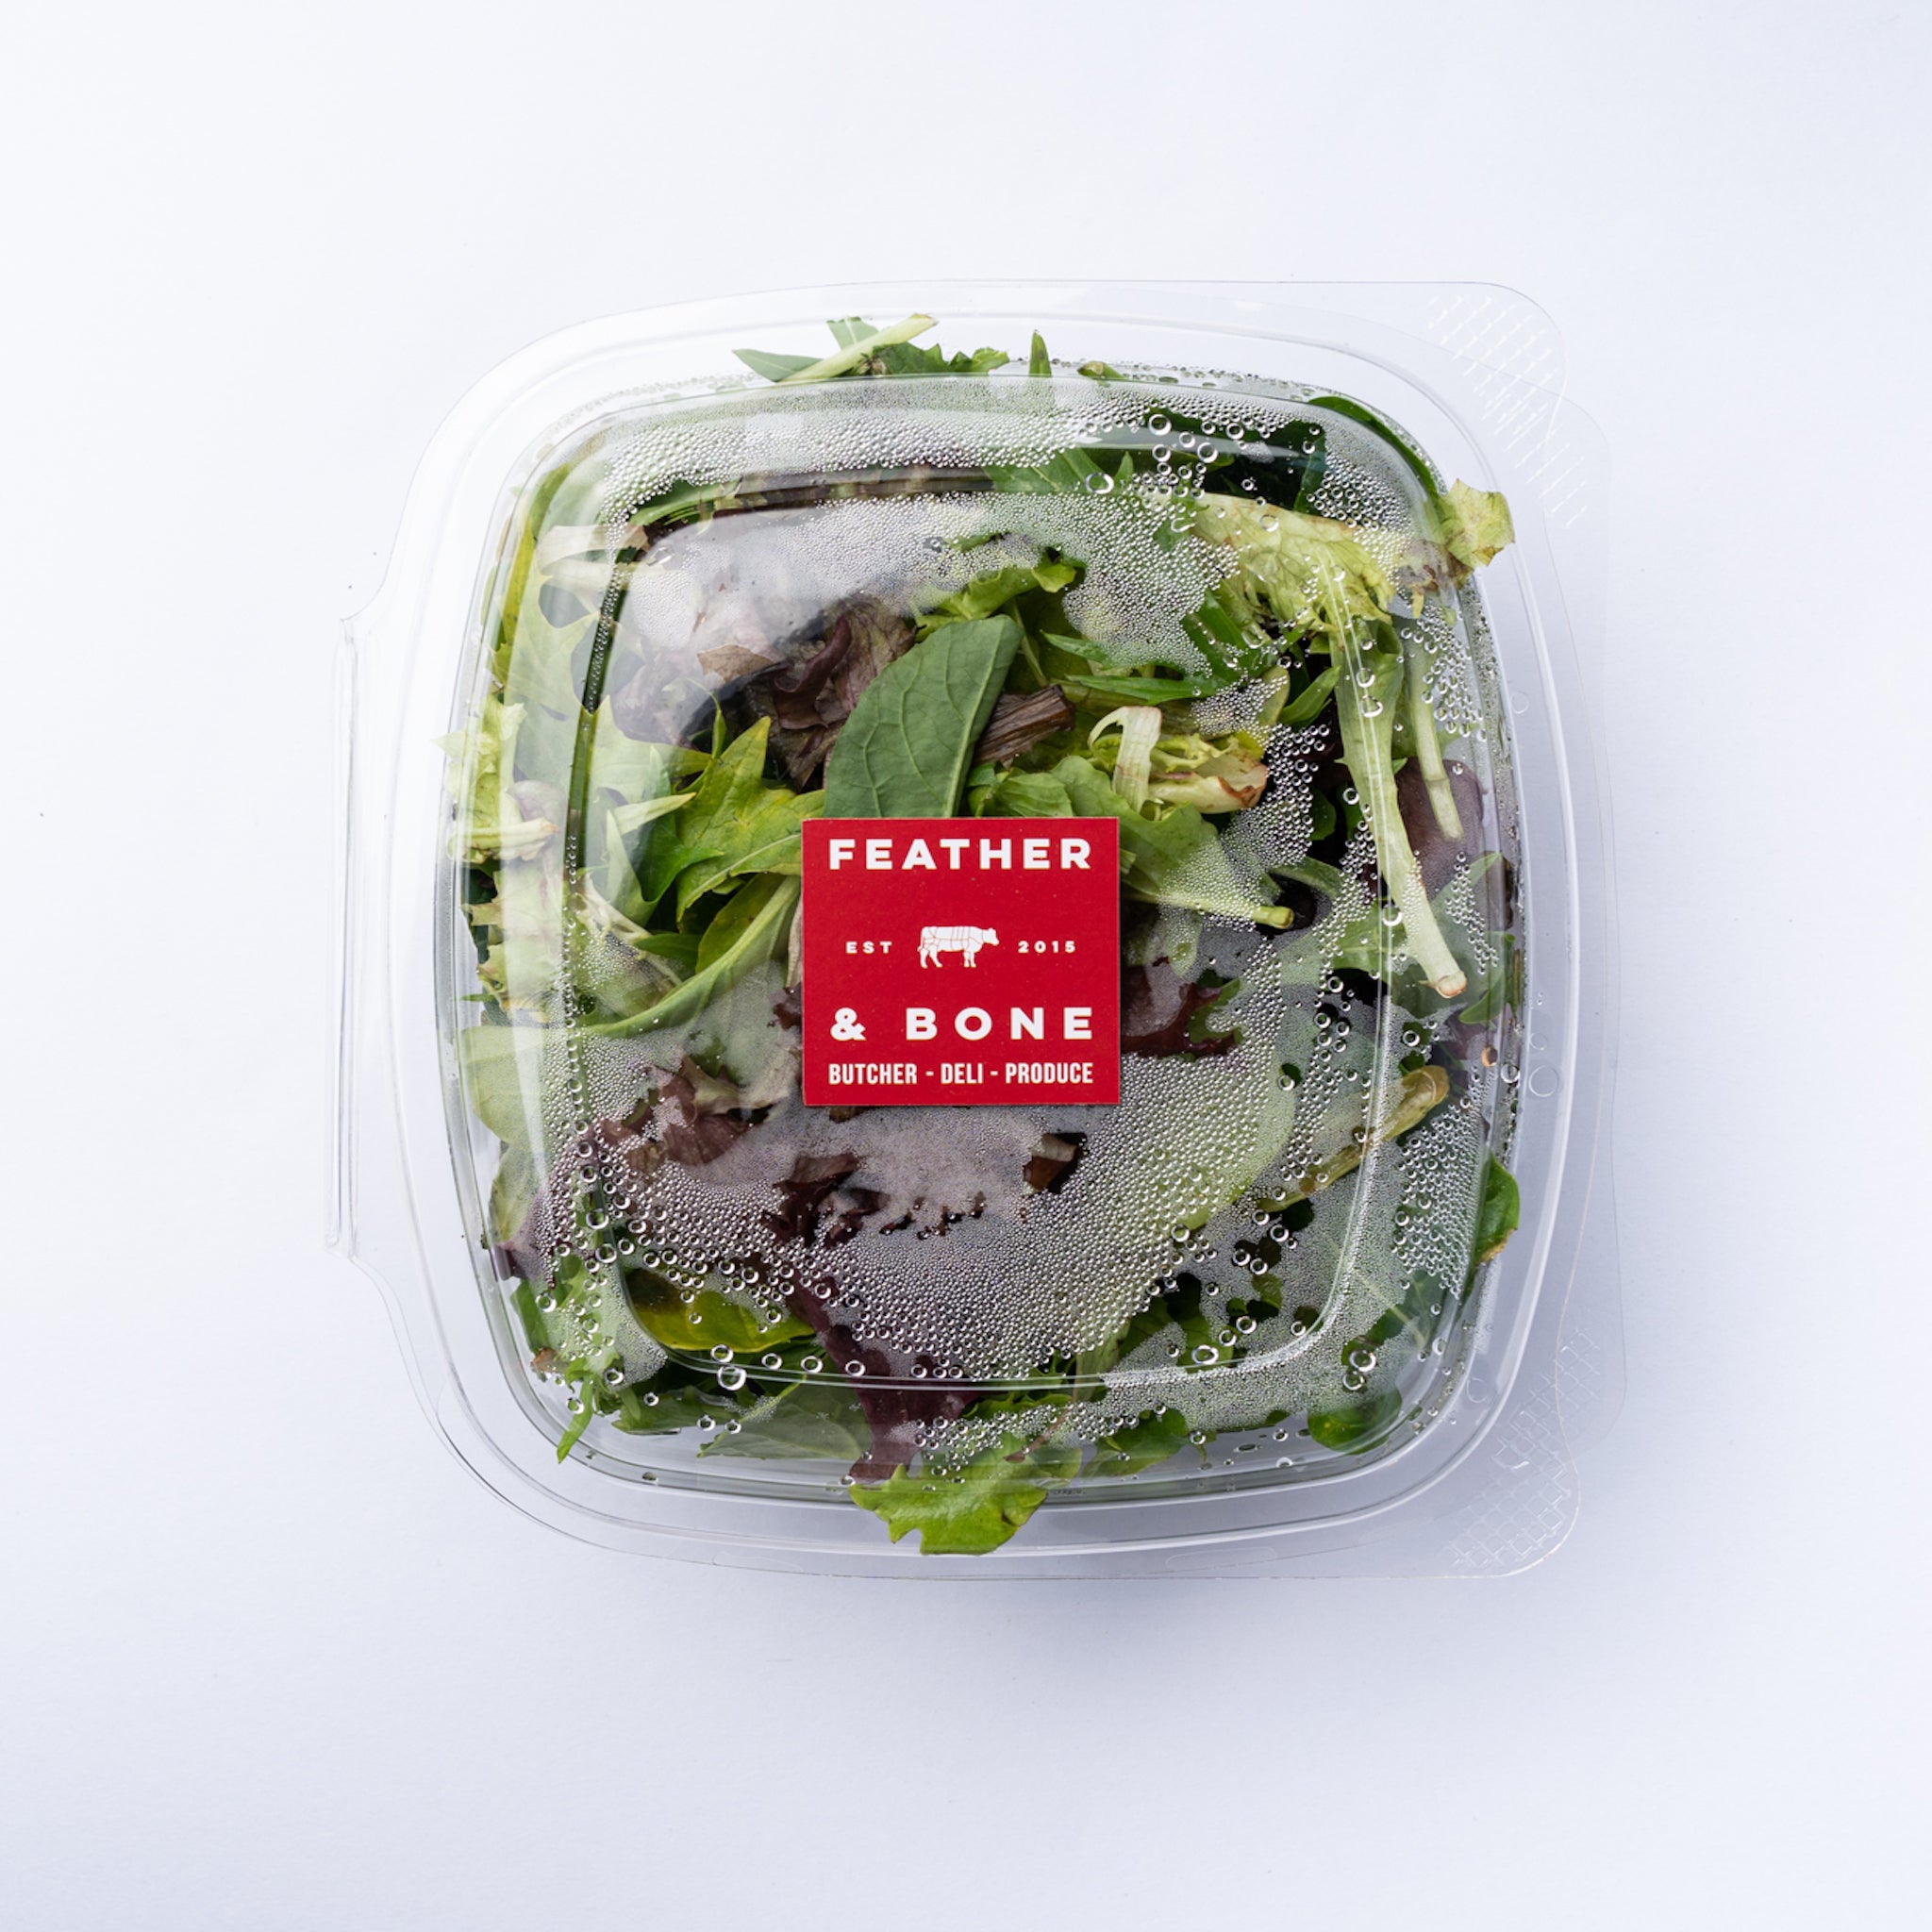 A plastic box of Mixed Leaves with a red sticker.